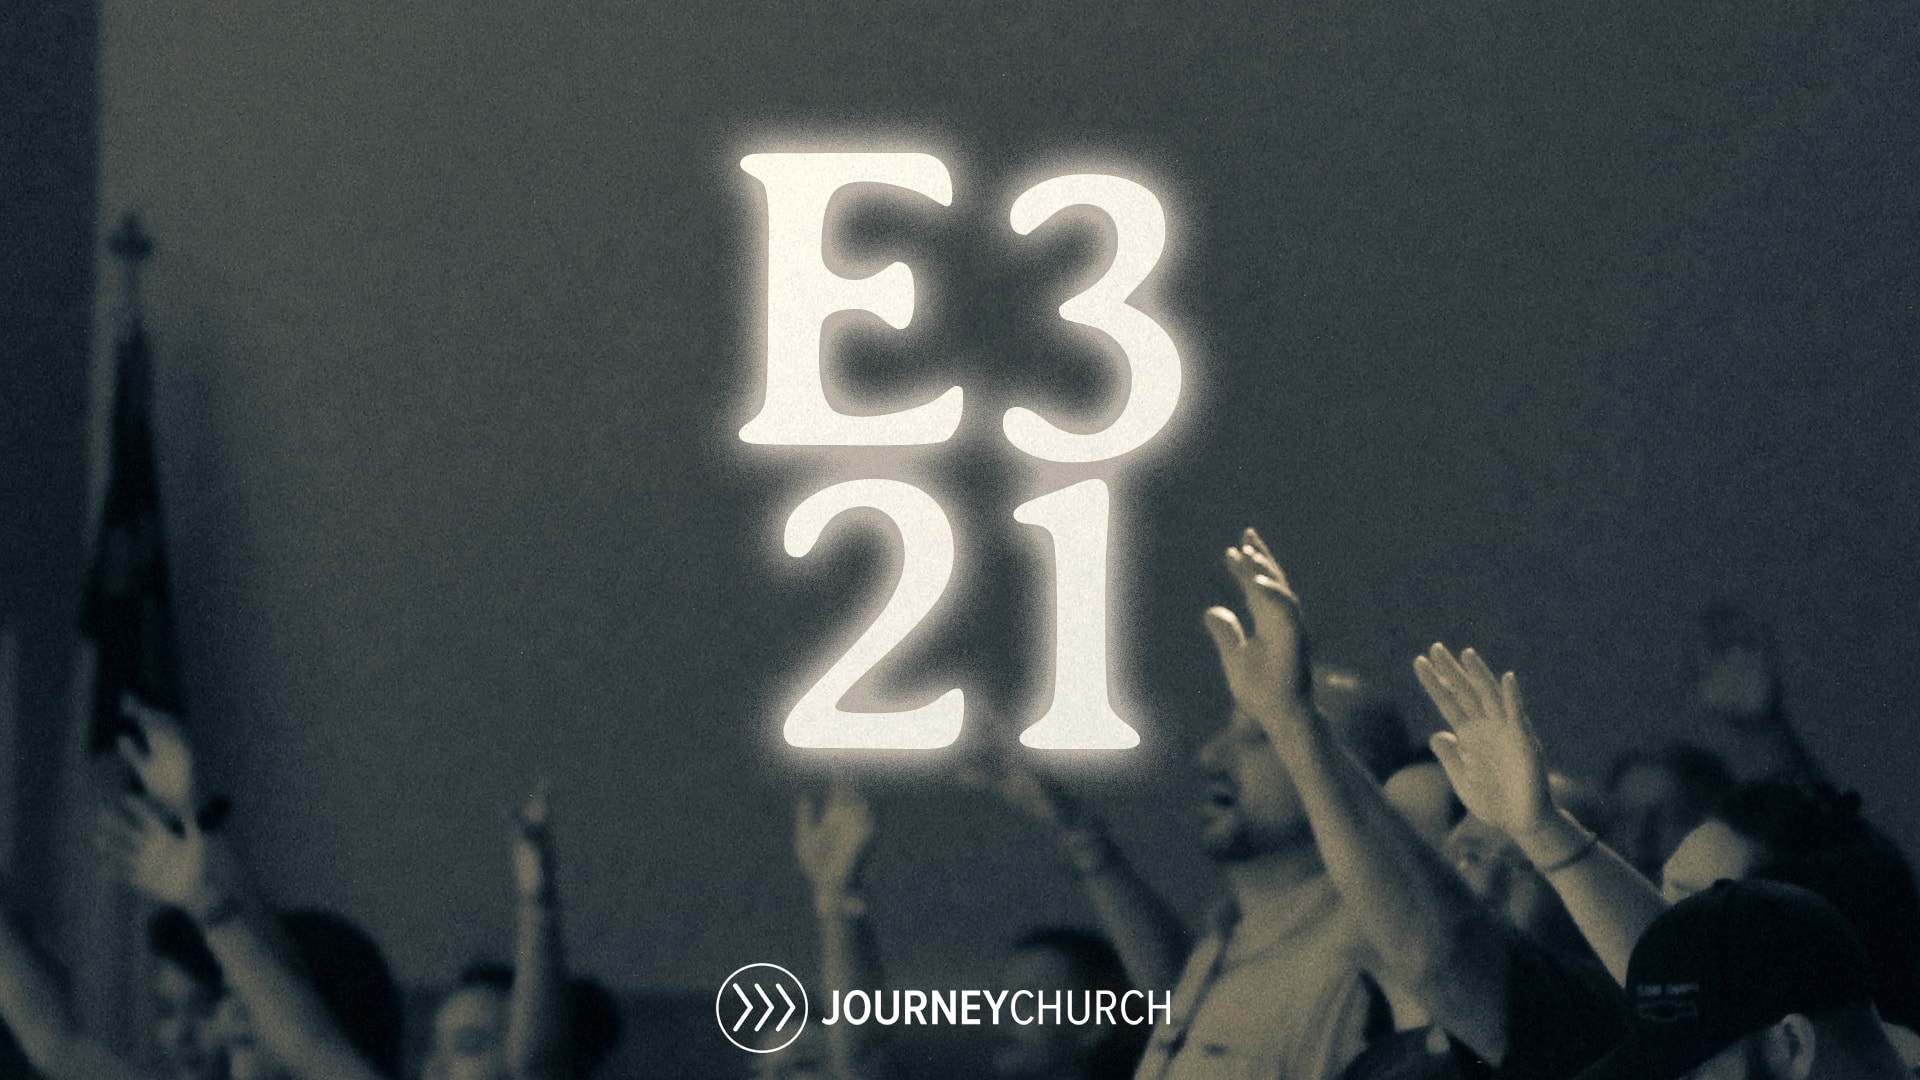 Featured image for “E3 21 – First Sunday”